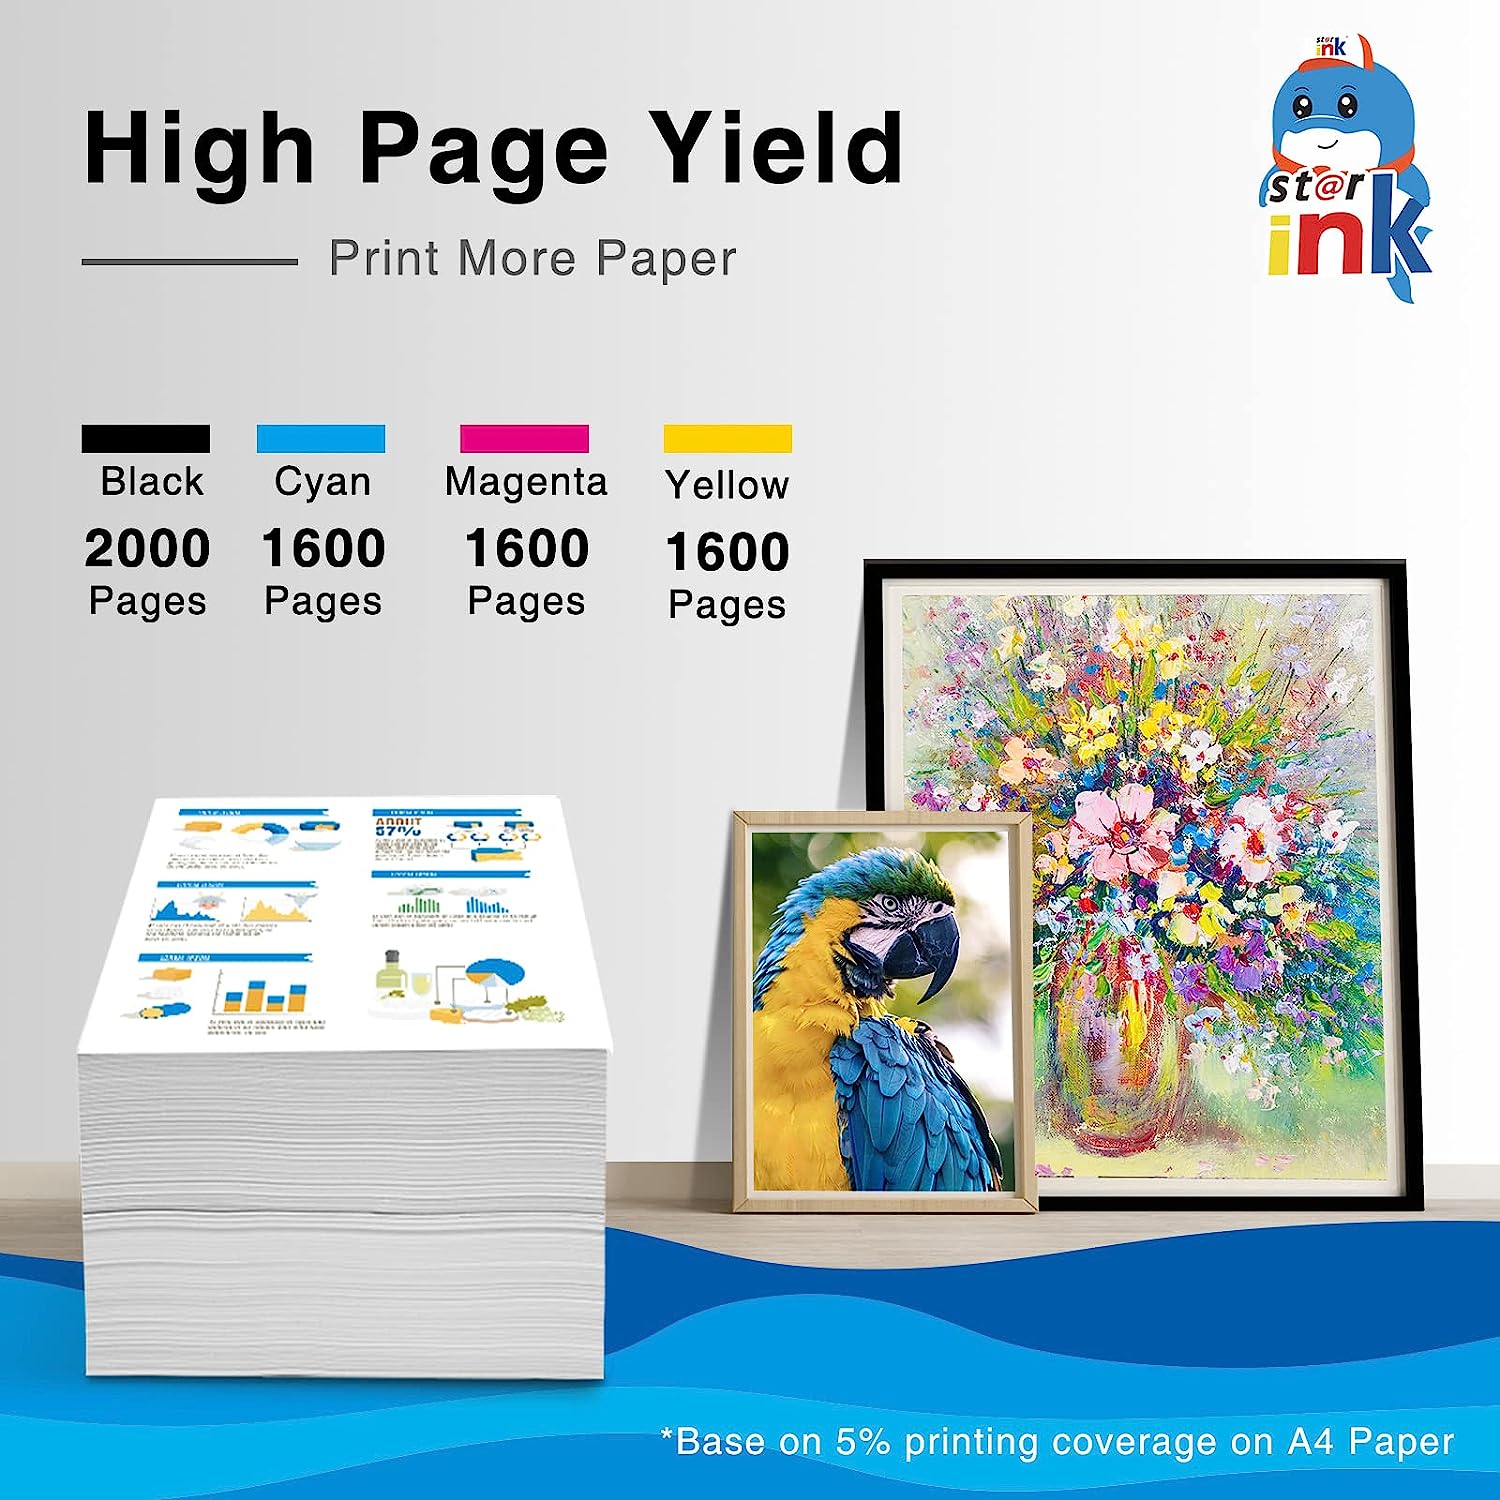 962XL Ink Cartridges Combo Pack Remanufactured High Yield HP 962 4-Packs - Linford Office:Printer Ink & Toner Cartridge